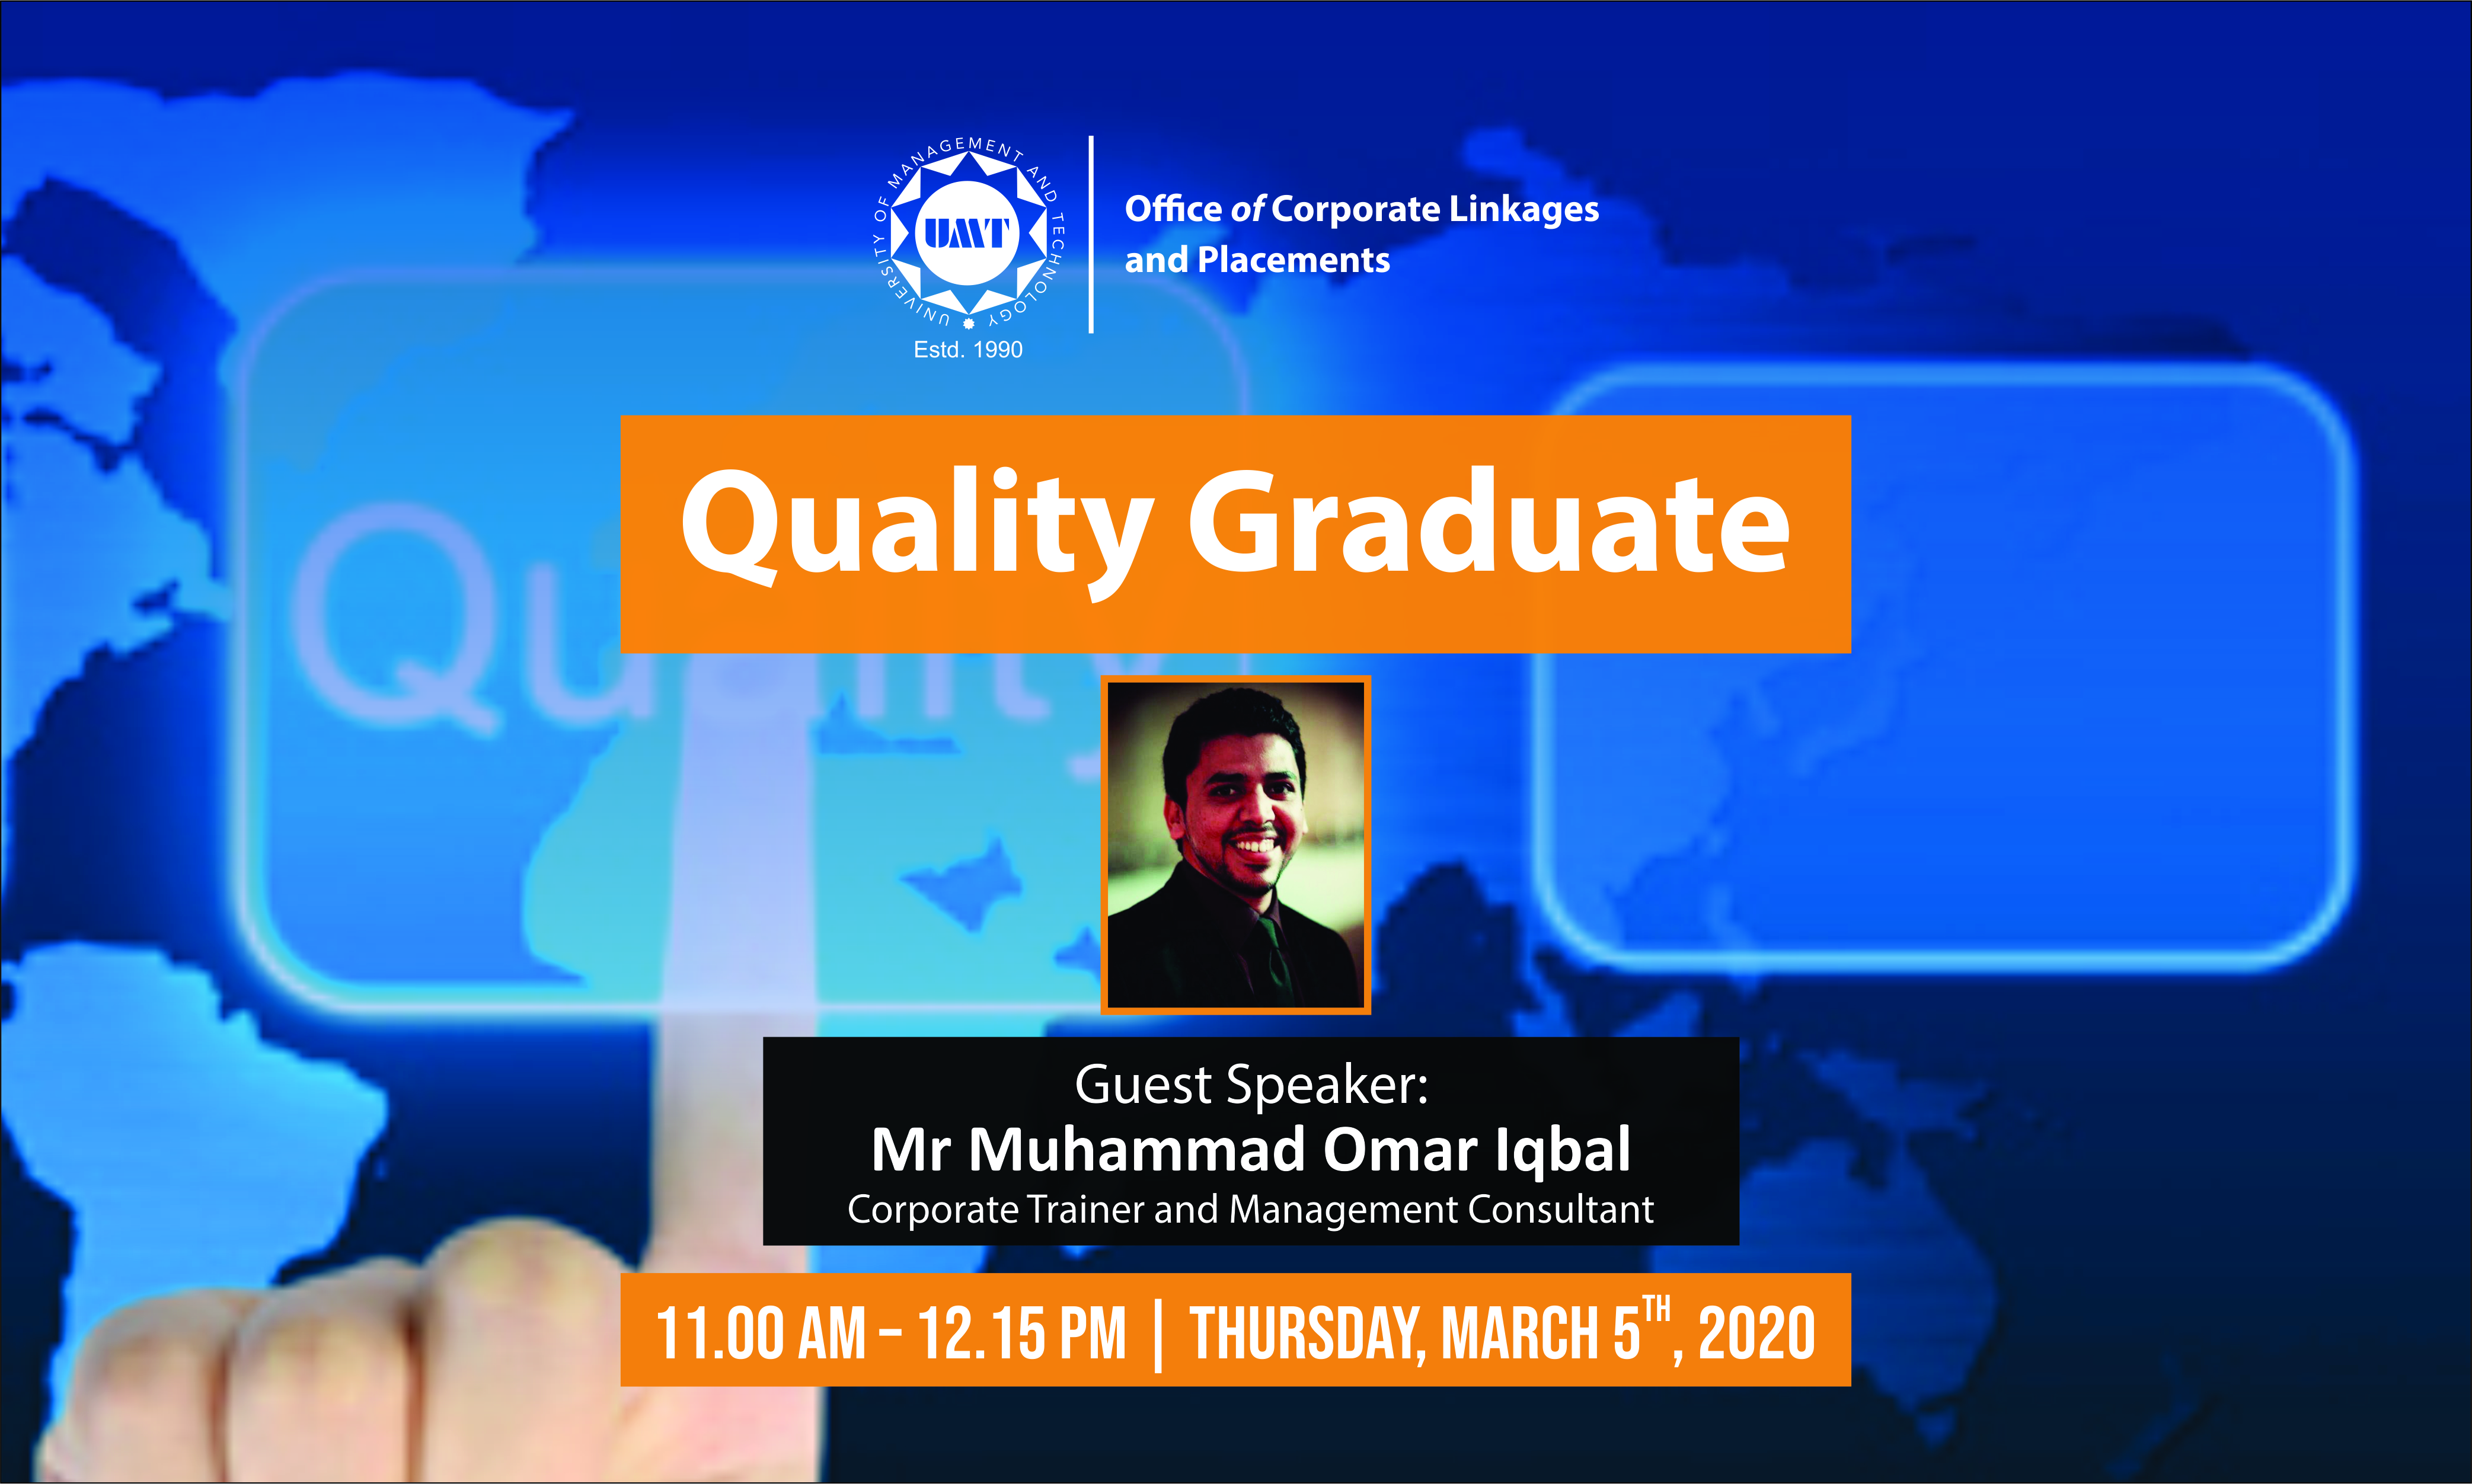 Future Quality Graduate by Muhammad Omar Iqbal - Corporate Trainer and Management Consultant